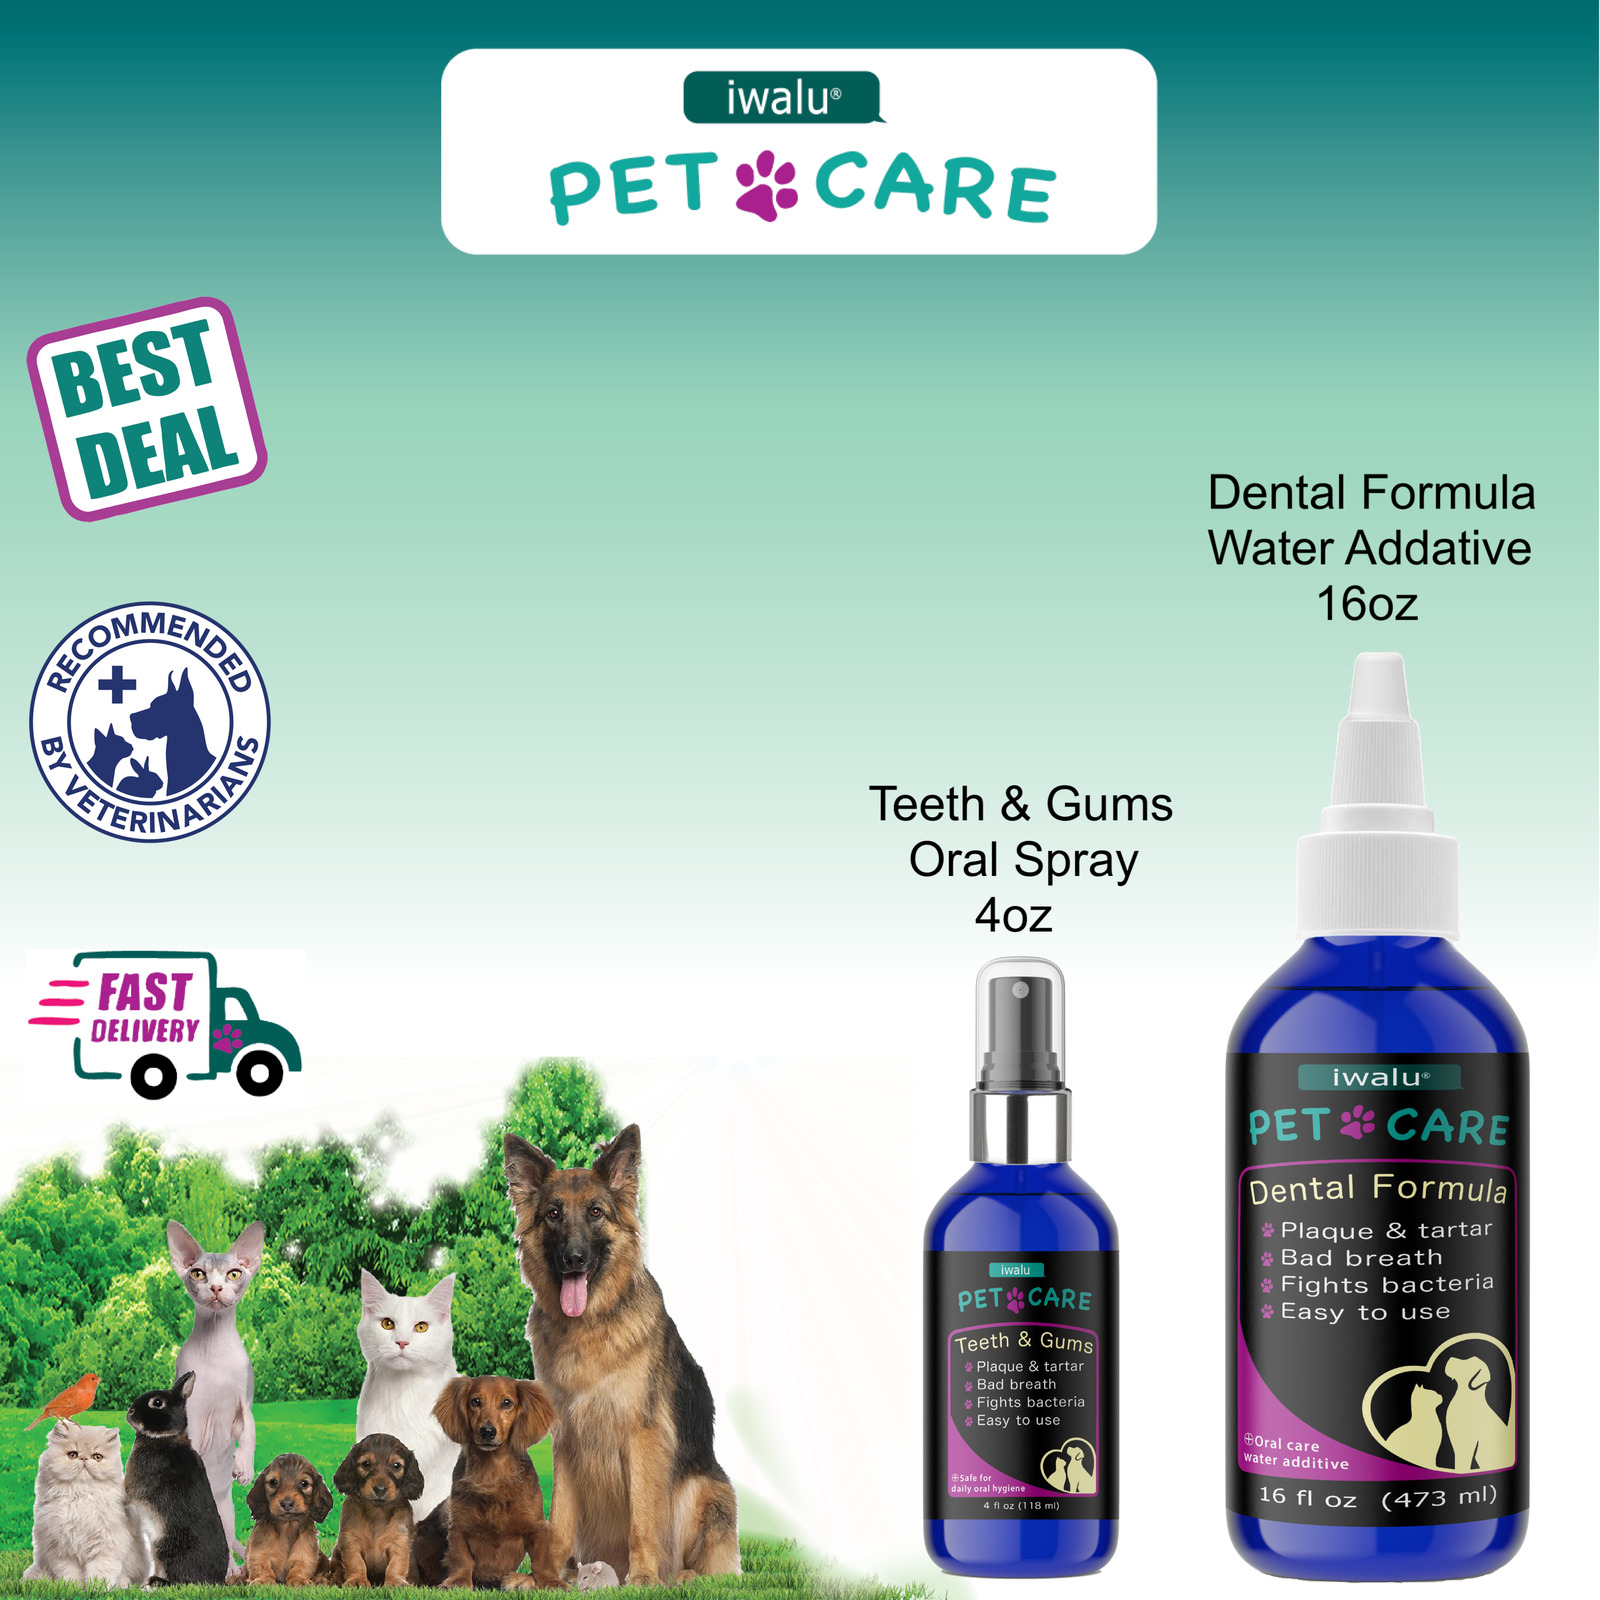 DOG TEETH CLEANING Pet Supplies Bad Breath treatment Mouthwash Water Additive